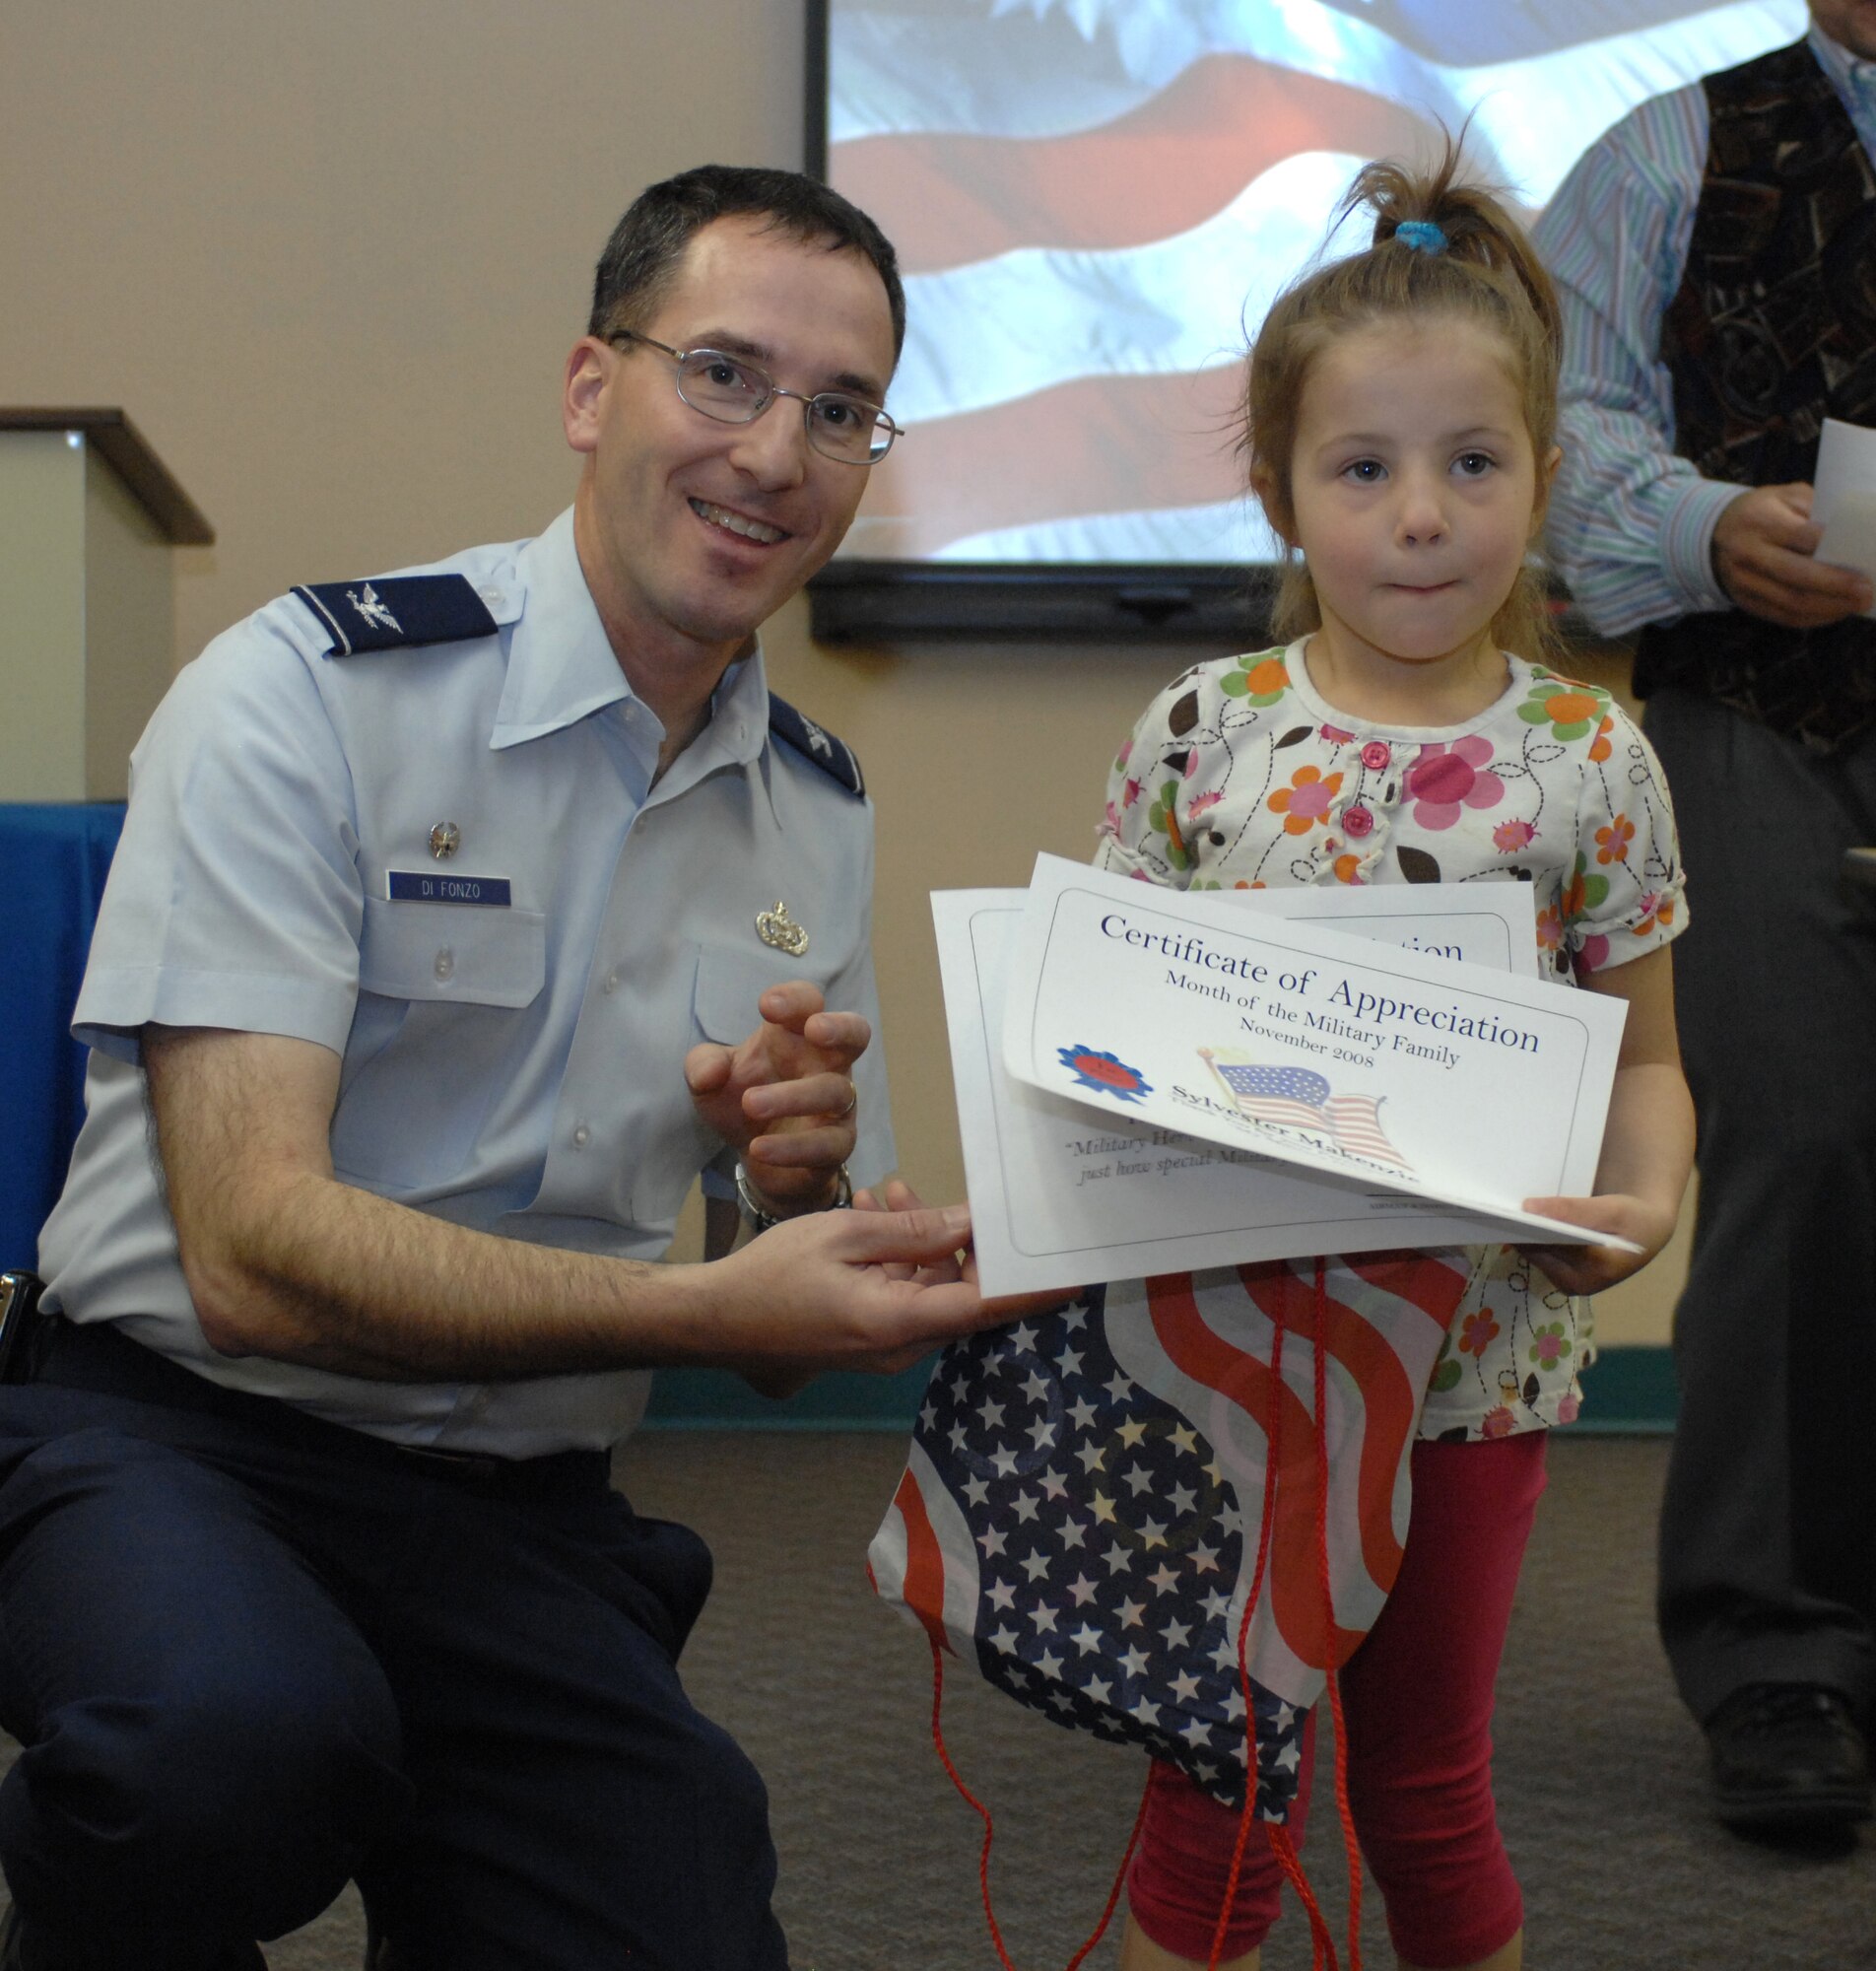 Col. Stephen DiFonzo, 49th Mission Support Group commander, presents an award to Makenzie Sylvester for winning 1st place in the 6 and under category of the essay contest at the Airman and Family Readiness Center at Holloman Air Force Base, N.M., Nov. 24. The theme for the essay contest was 'My Military Hero" in support of Military Family Appreciation Month. (U.S. Air Force photo/Airman Sondra M. Escutia)